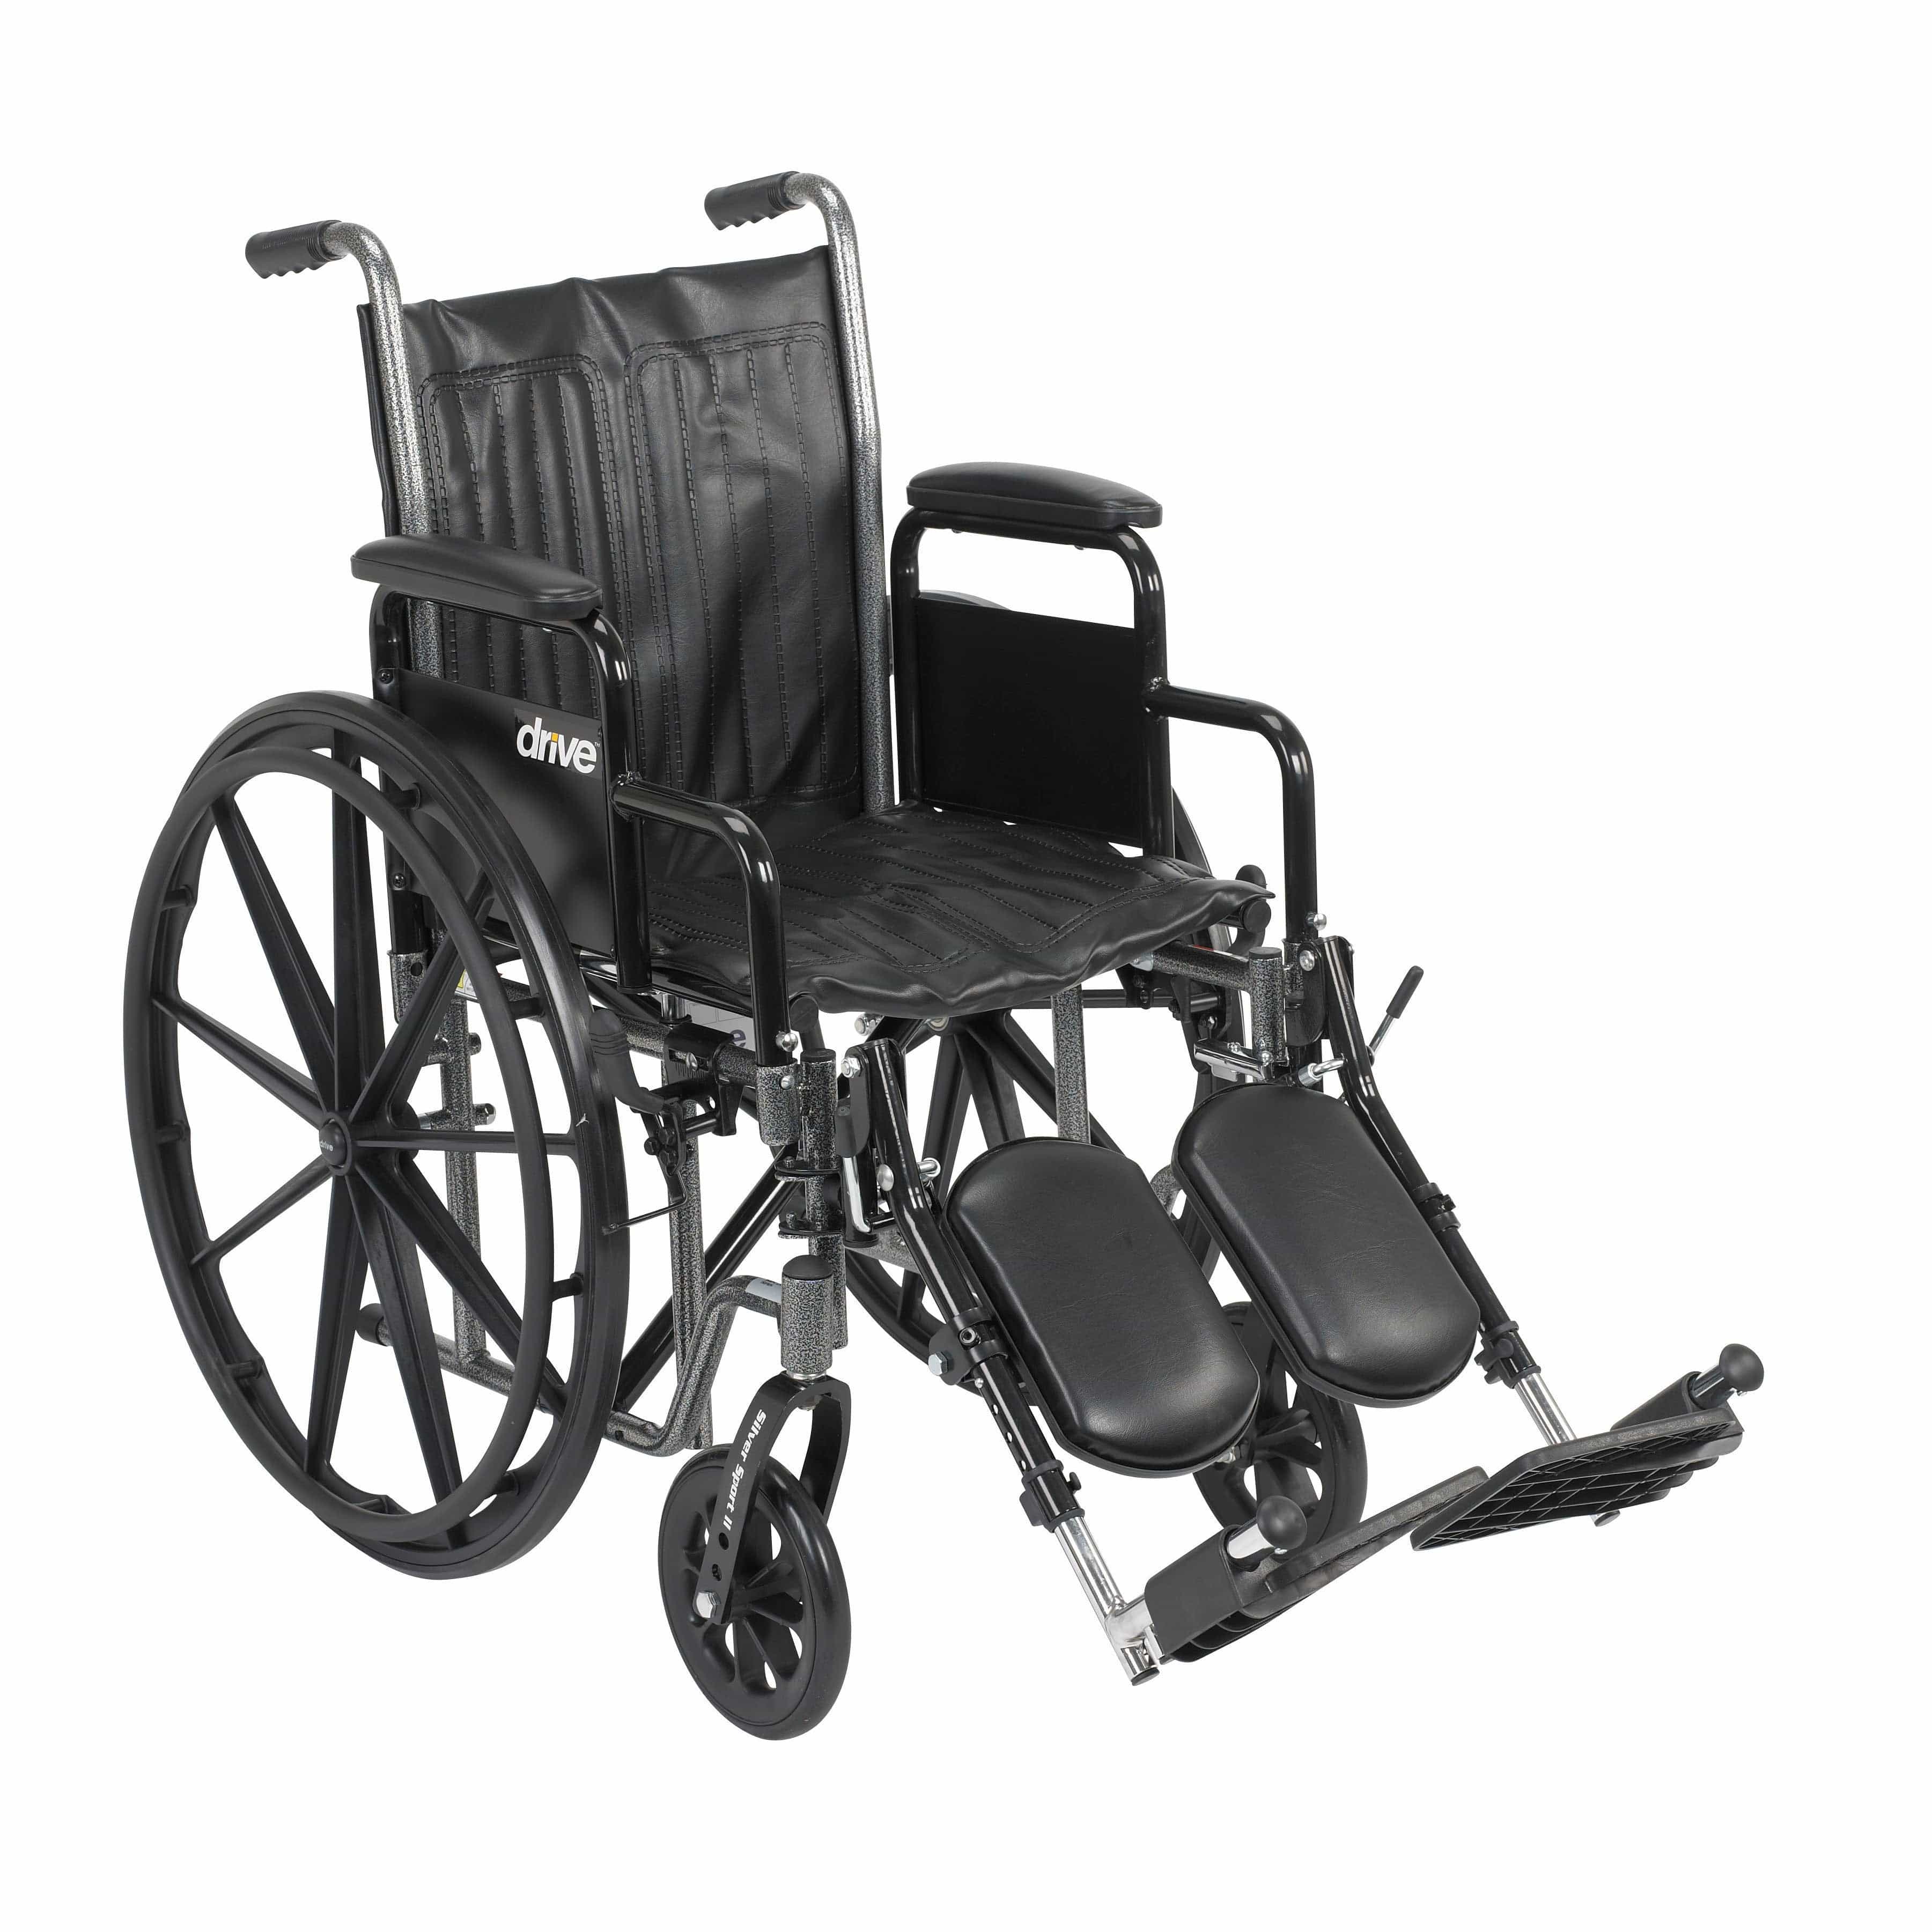 Drive Medical Wheelchairs/Standard Wheelchairs Detachable Desk Arms and Elevating Leg Rests / 18" Seat Drive Medical Silver Sport 2 Wheelchair